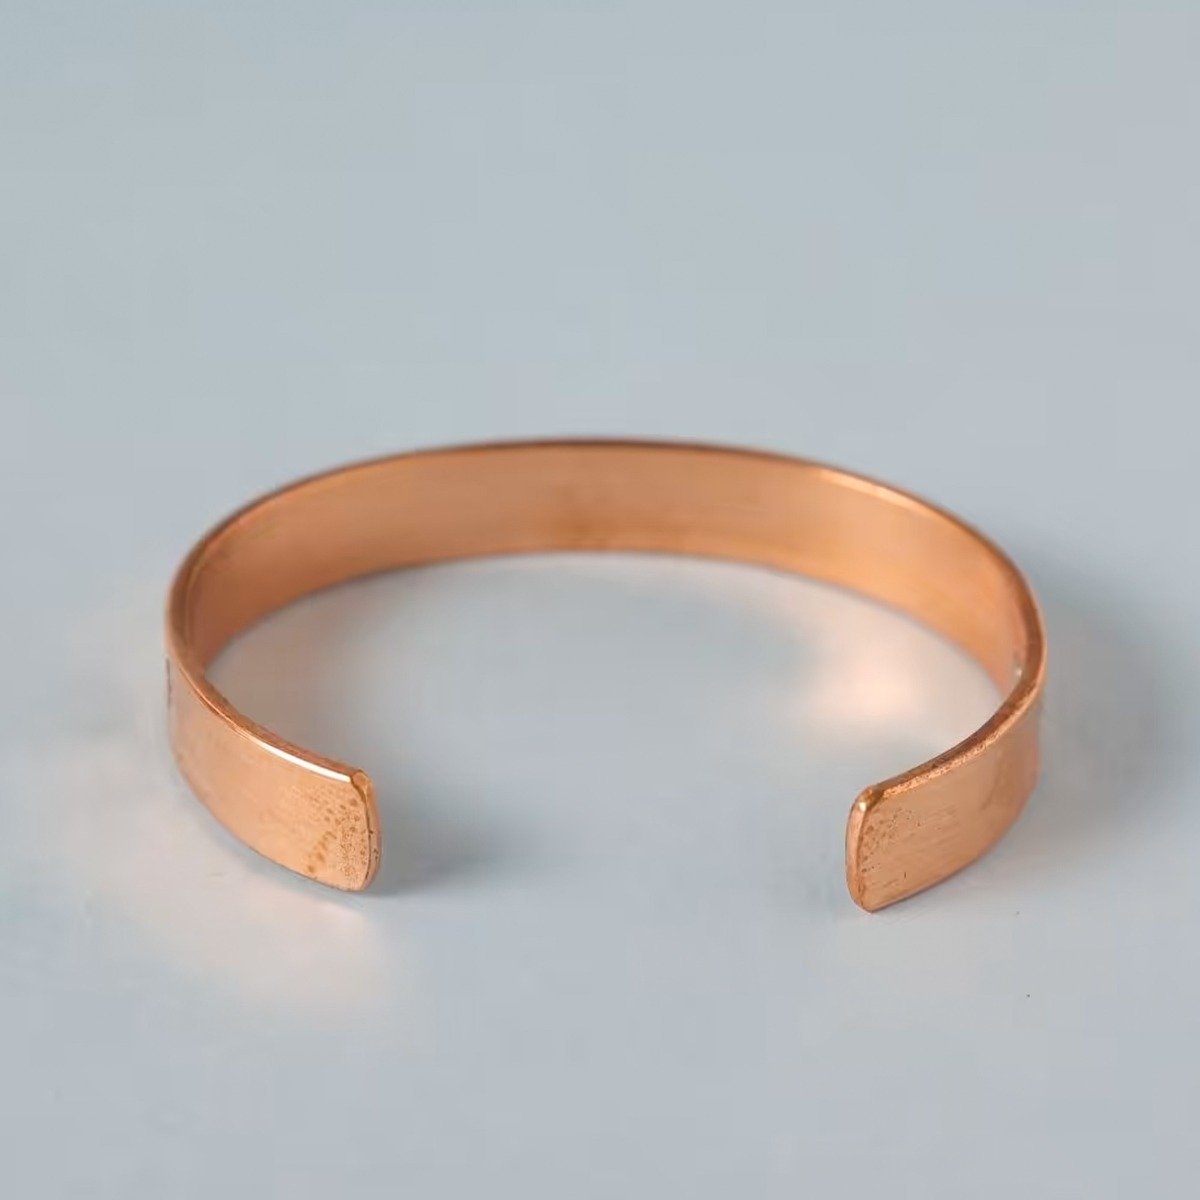 Buy Copper Cuff - Style 6 Online at Best Price | Isha Life